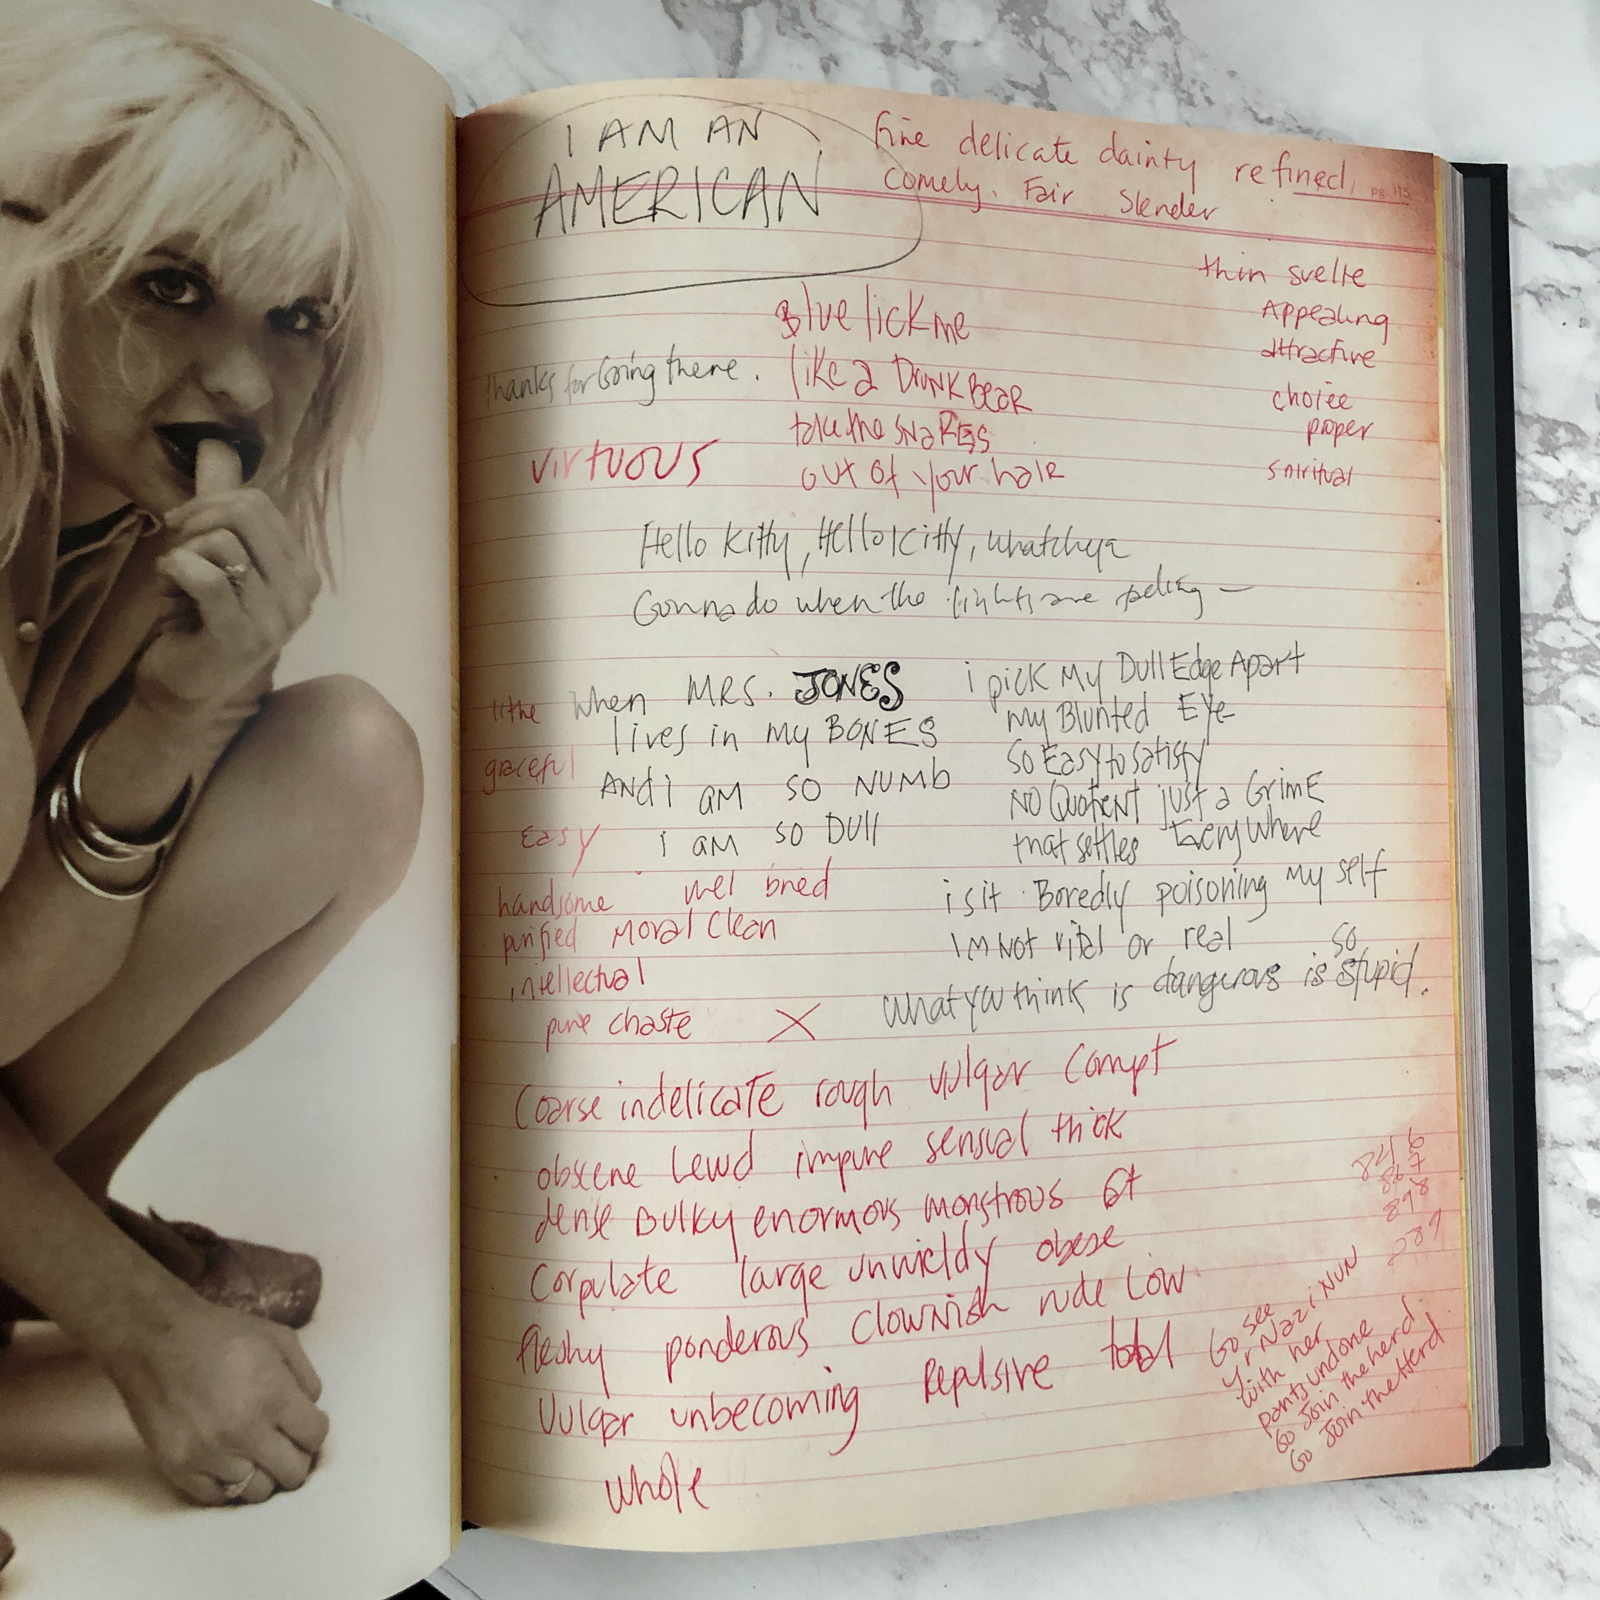 Dirty Blonde: The Diaries of Courtney Love [SIGNED FIRST PRINTING]